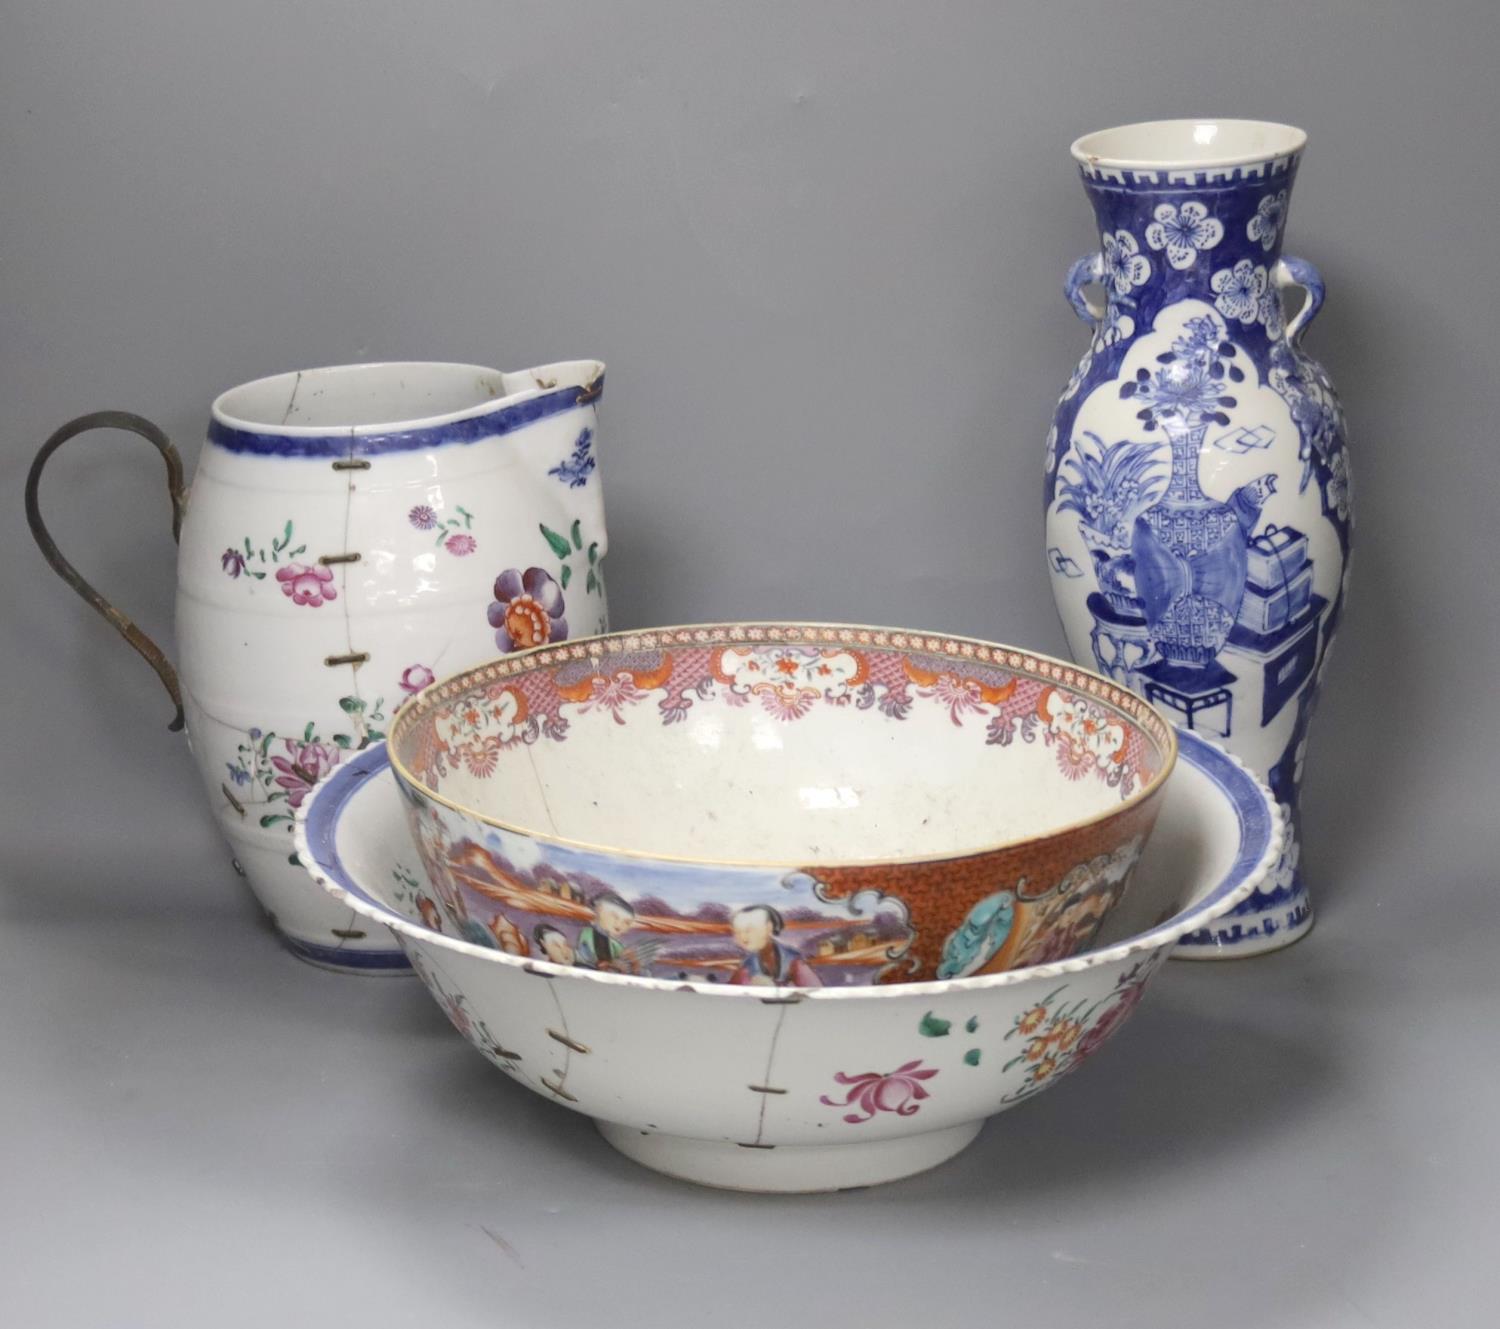 A Chinese Jiaqing export porcelain toilet jug and basin, a small punch bowl, and a blue and white